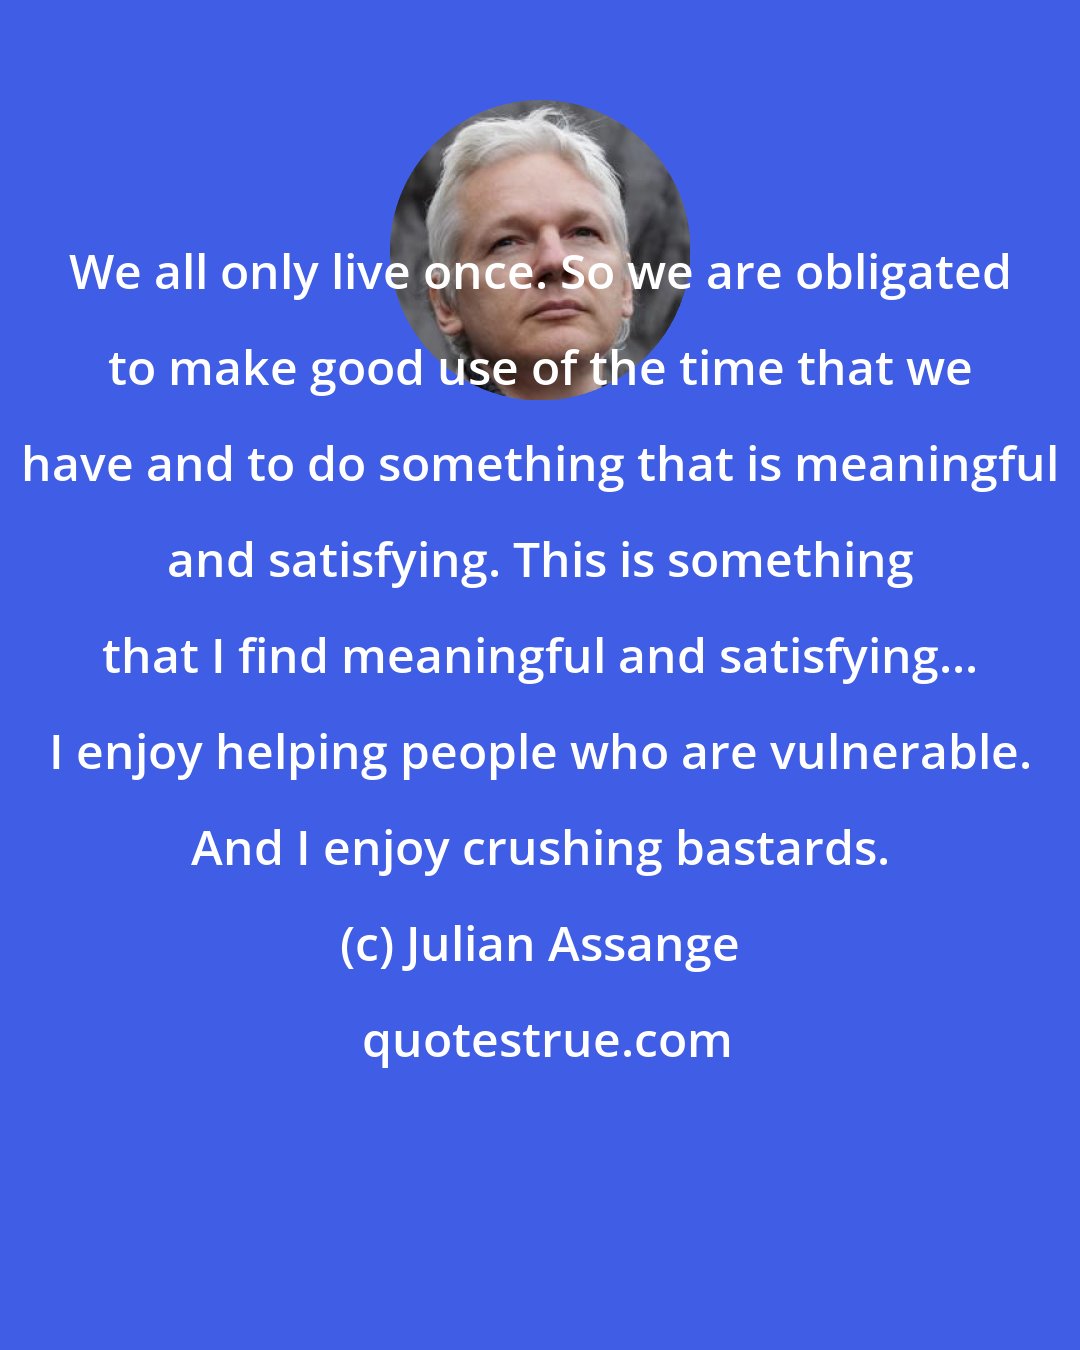 Julian Assange: We all only live once. So we are obligated to make good use of the time that we have and to do something that is meaningful and satisfying. This is something that I find meaningful and satisfying... I enjoy helping people who are vulnerable. And I enjoy crushing bastards.